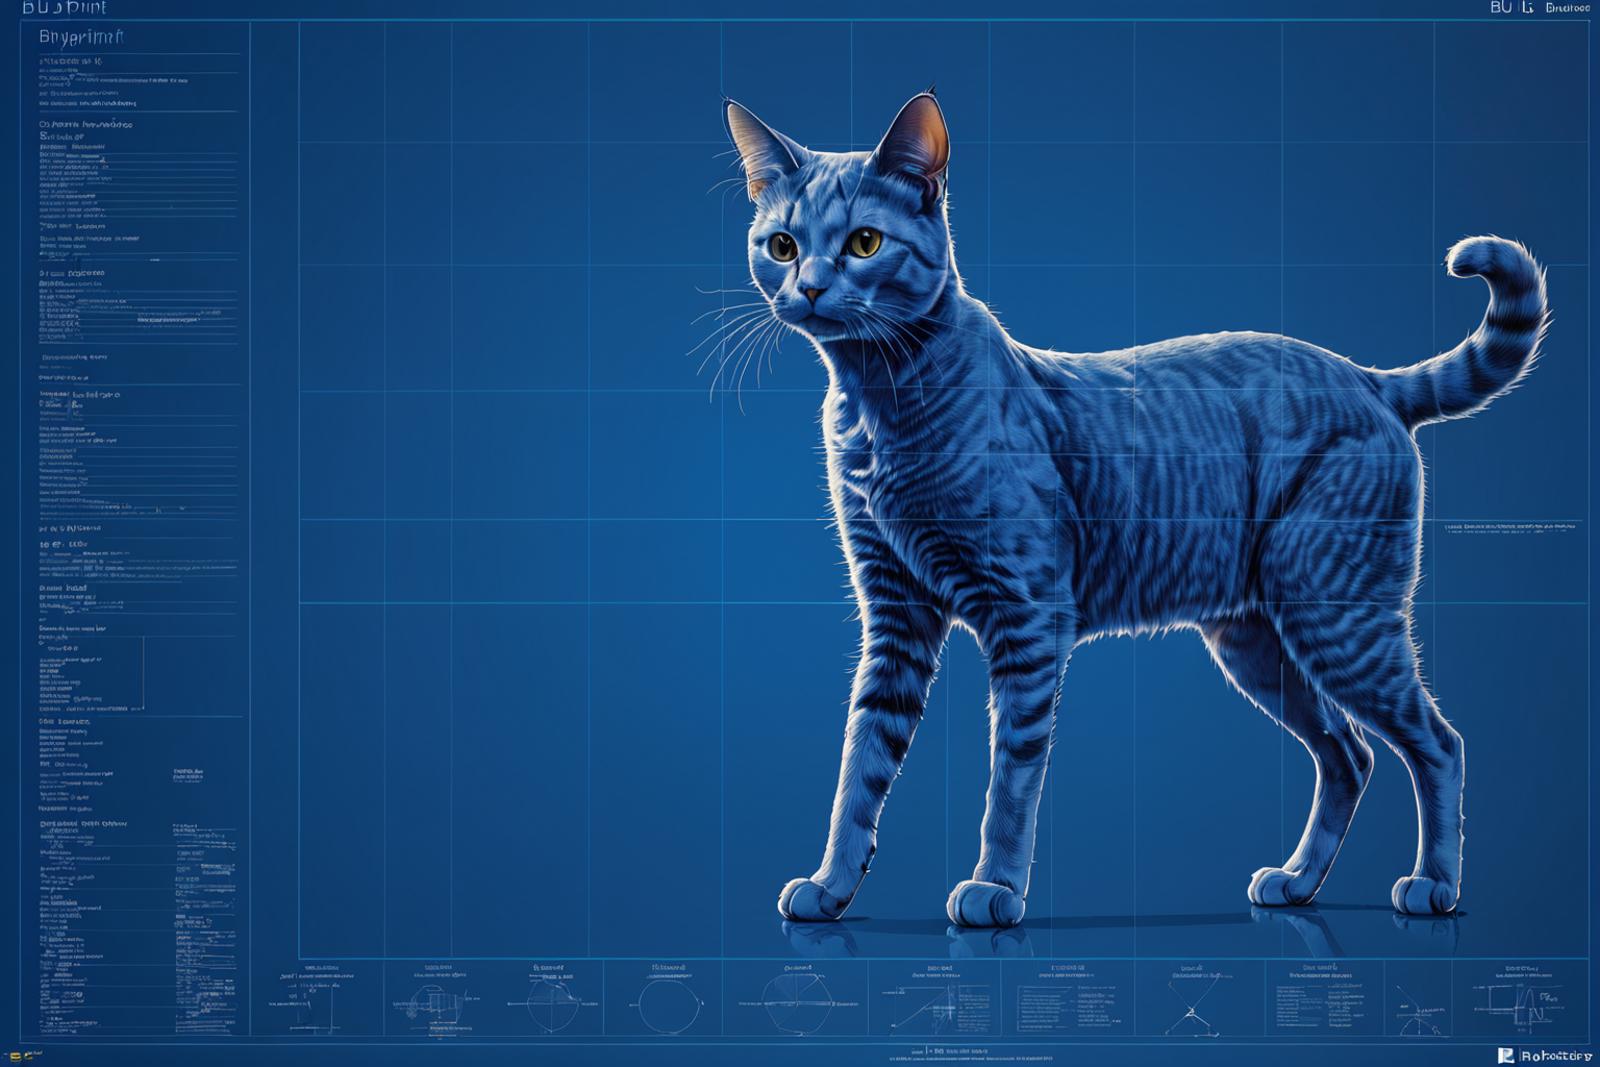 A blue cat with yellow eyes standing on its hind legs in front of blue background.